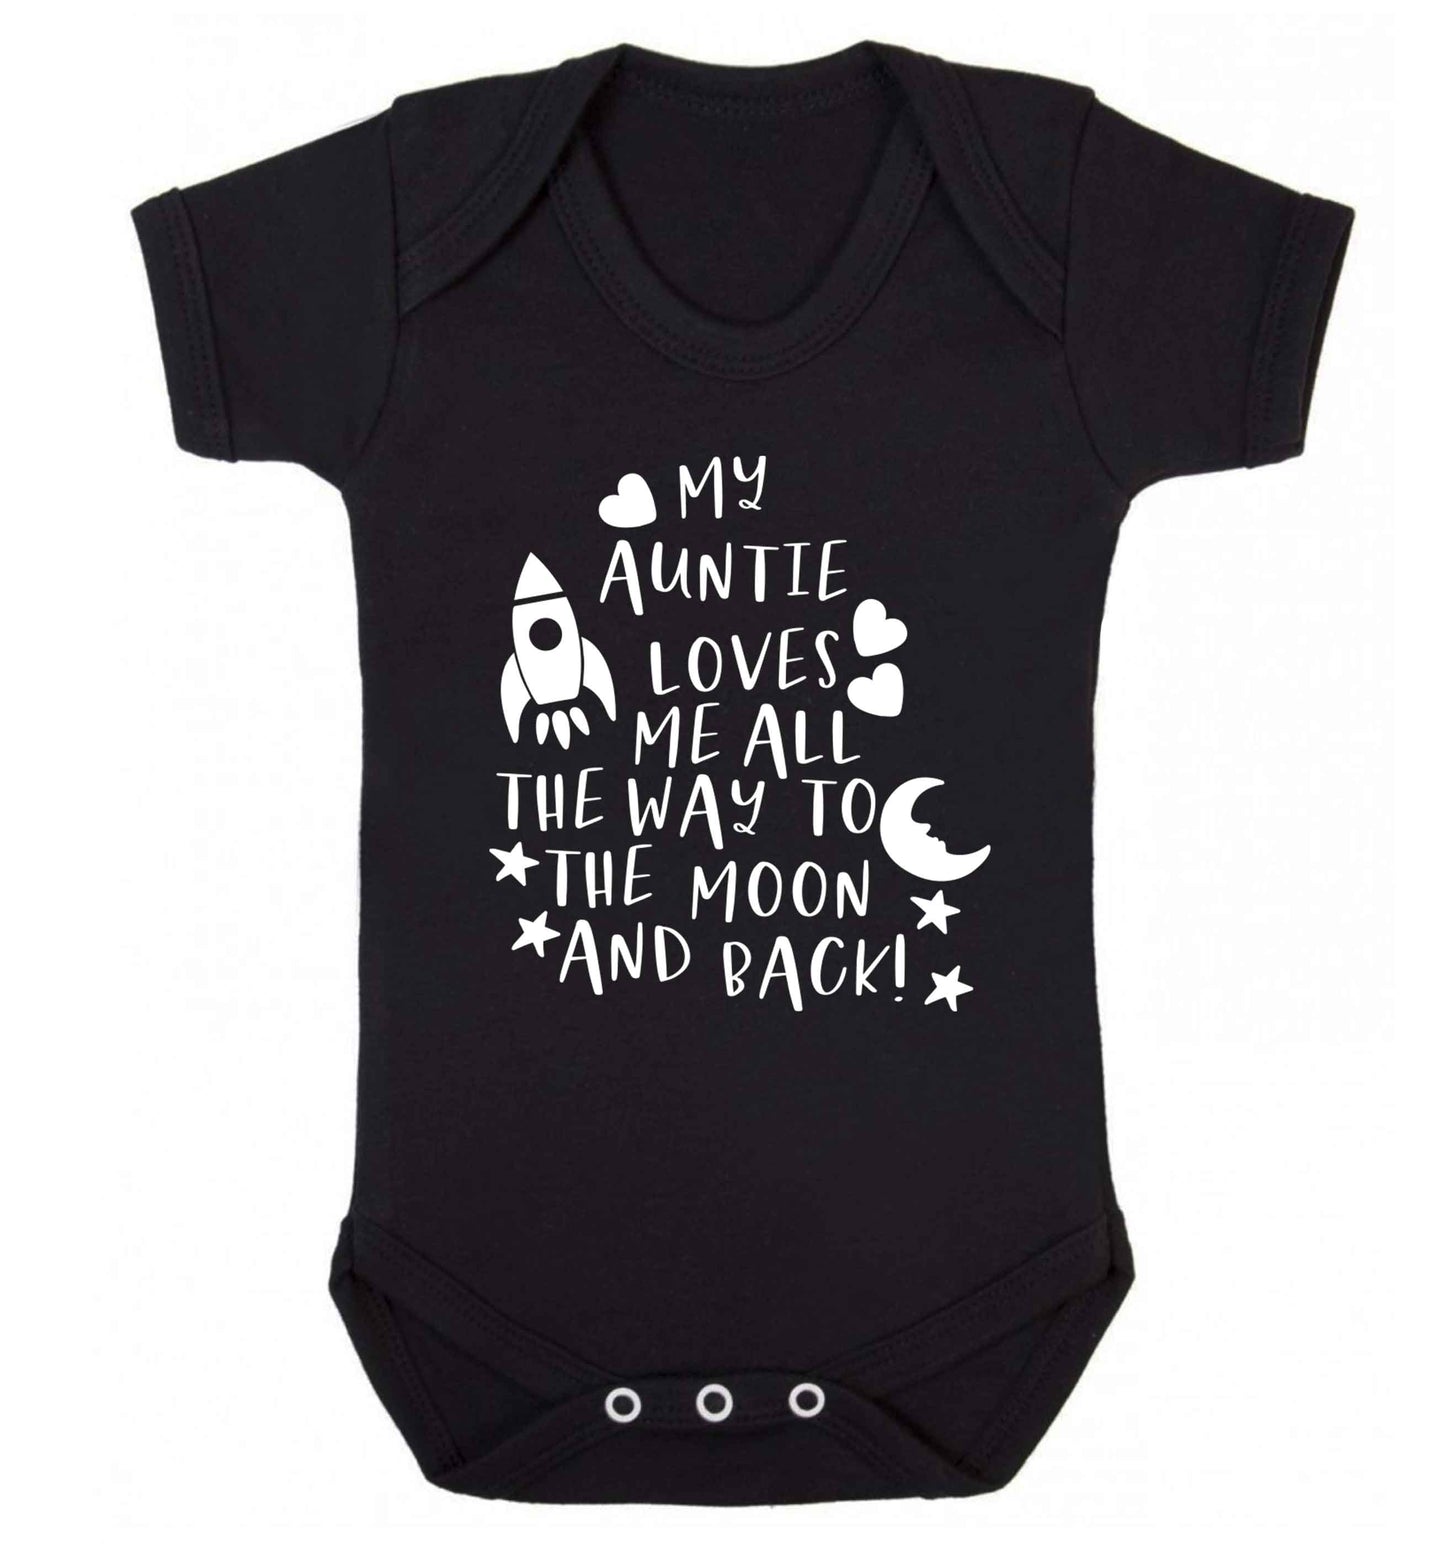 My auntie loves me all the way to the moon and back Baby Vest black 18-24 months